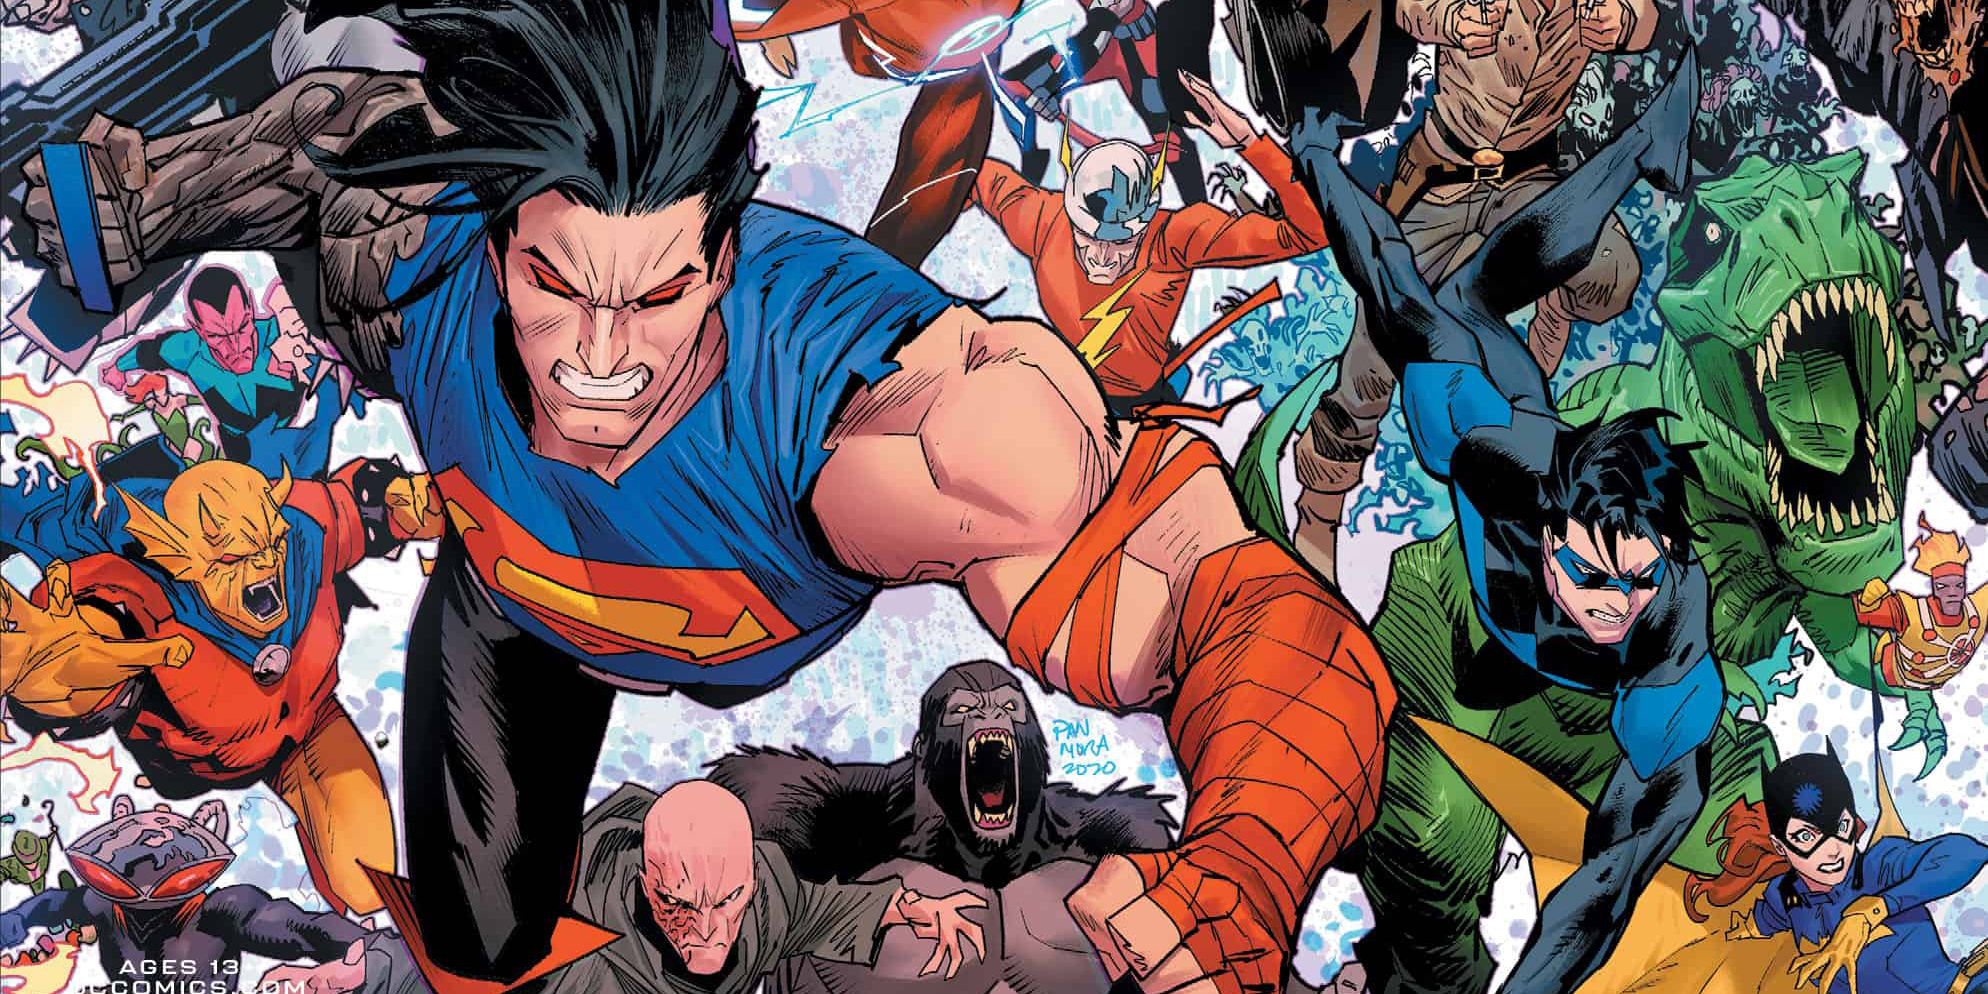 Death Metal: The Last 52 – War of the Multiverses Chronicles DC’s Final Battles